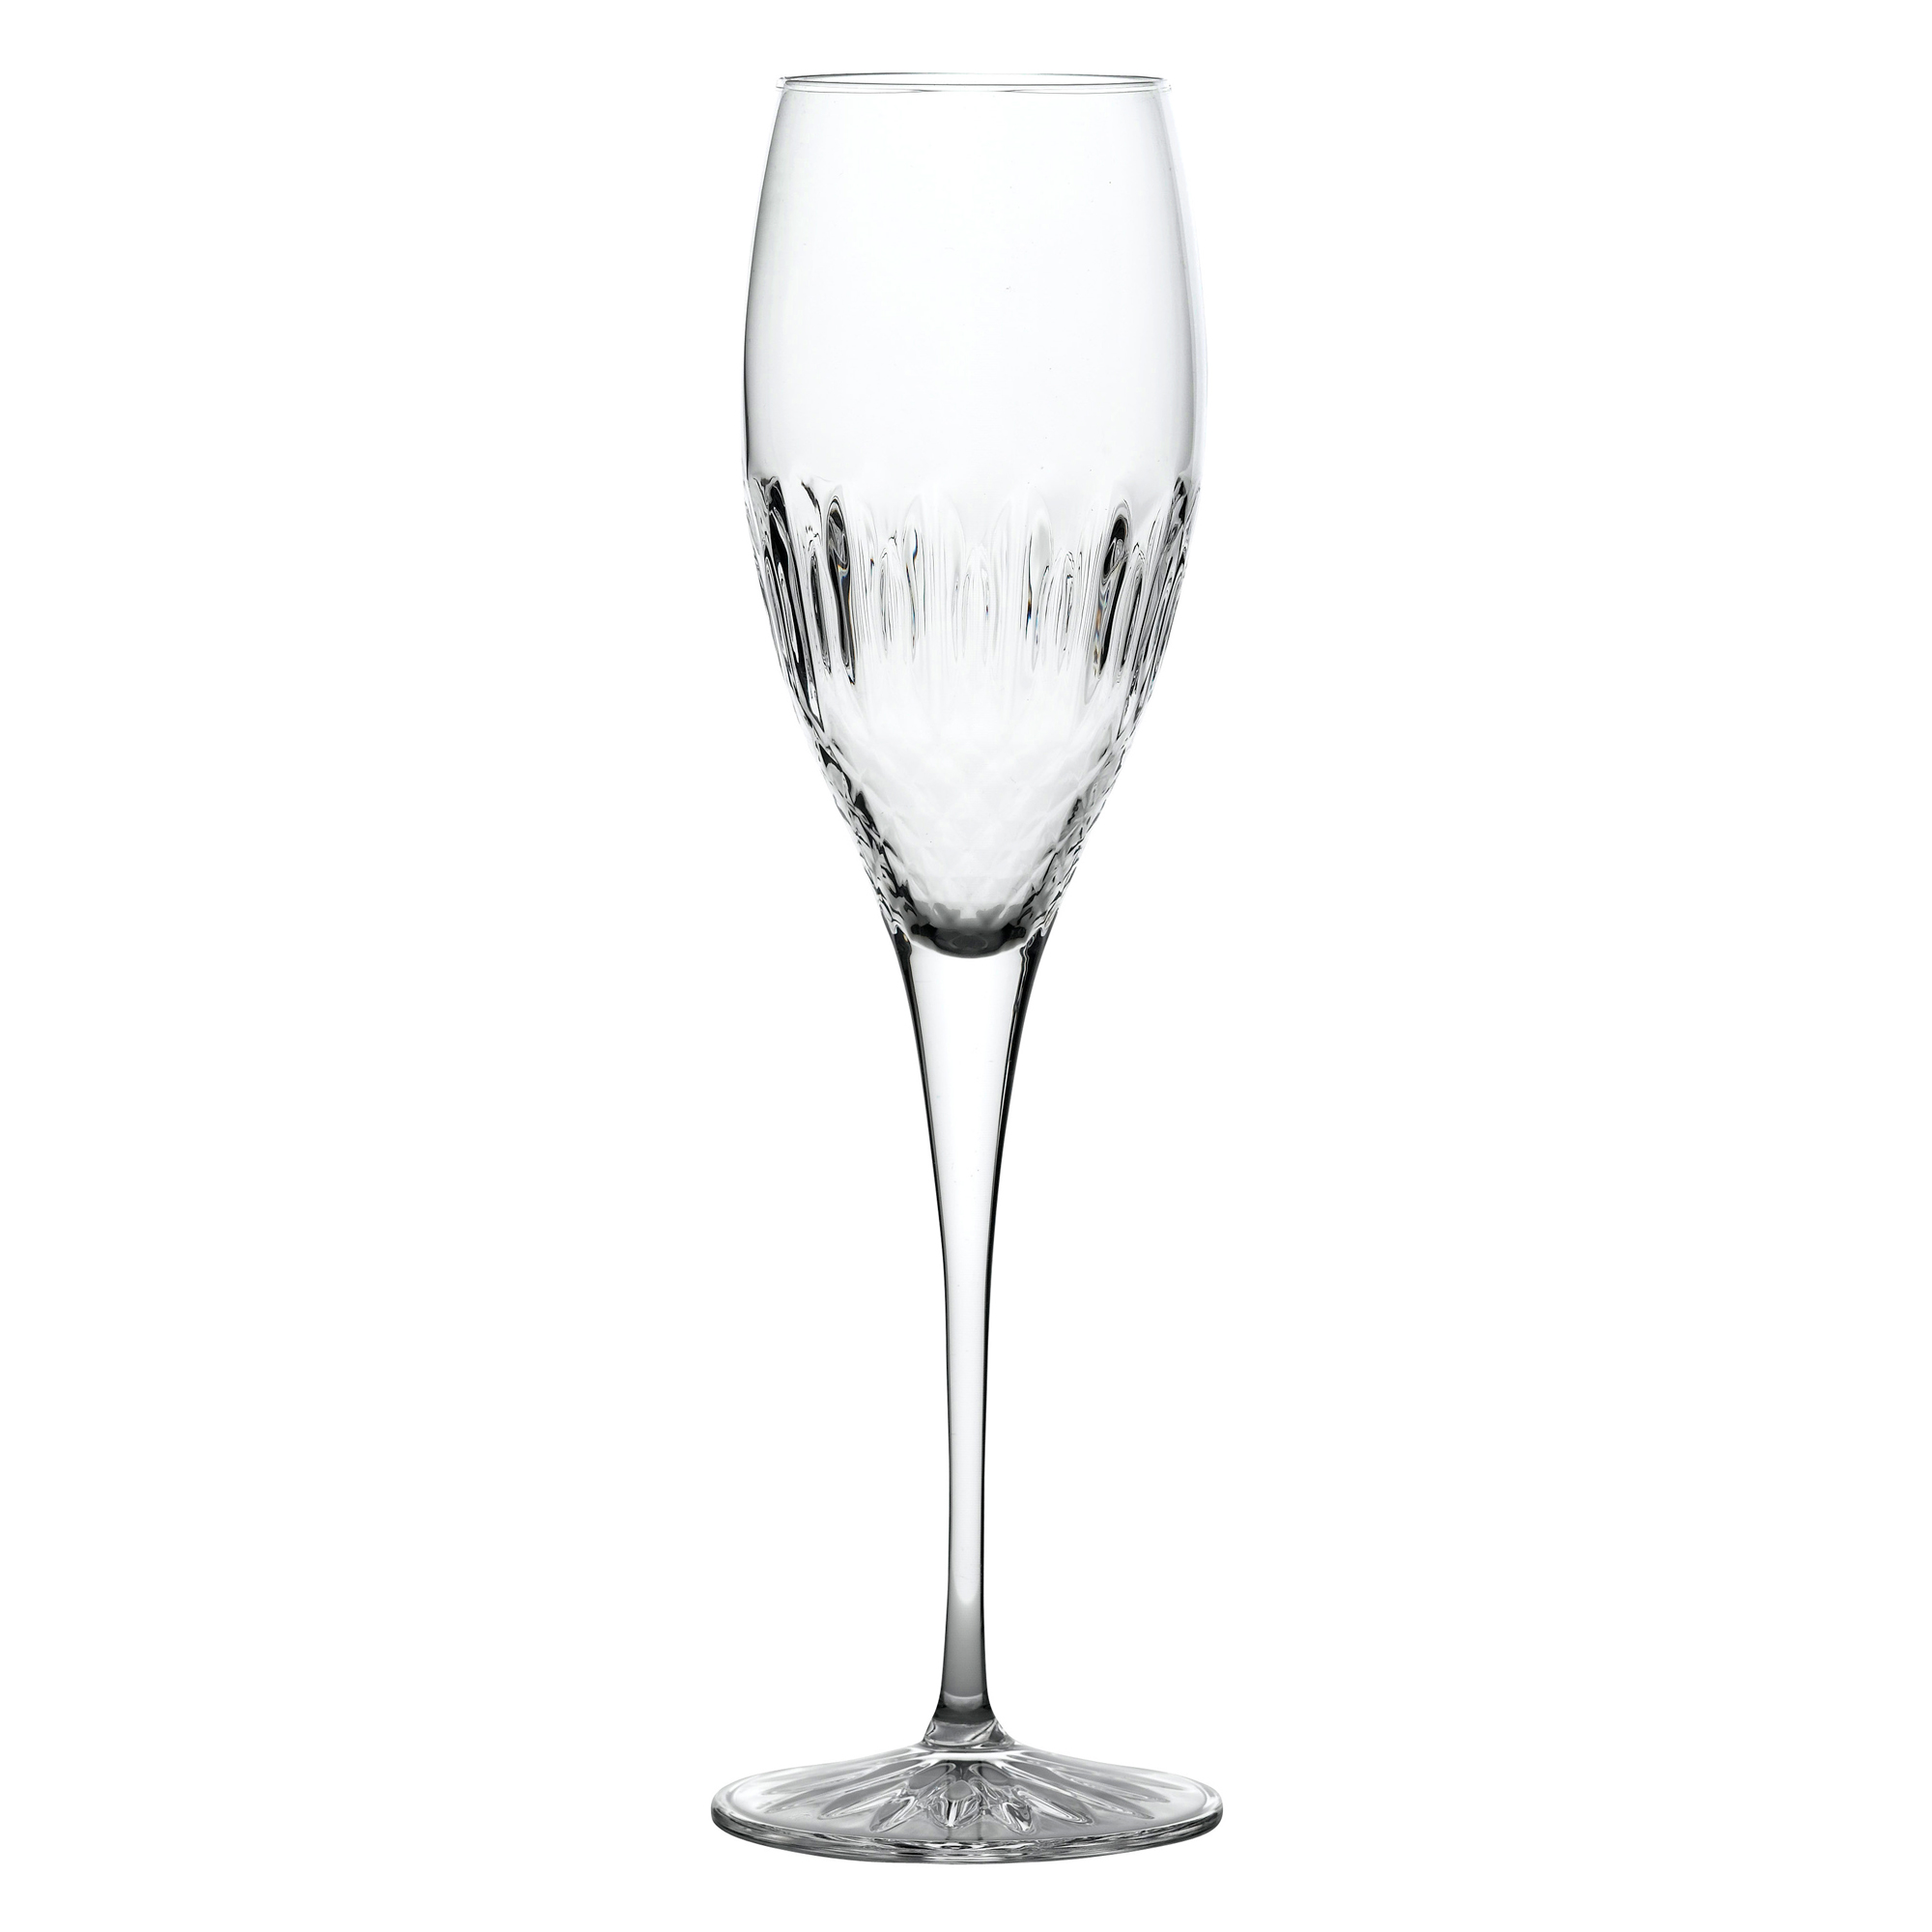 Ghost Black’ Collection Champagne Flutes DIAMANTE Black Crystal Glasses 